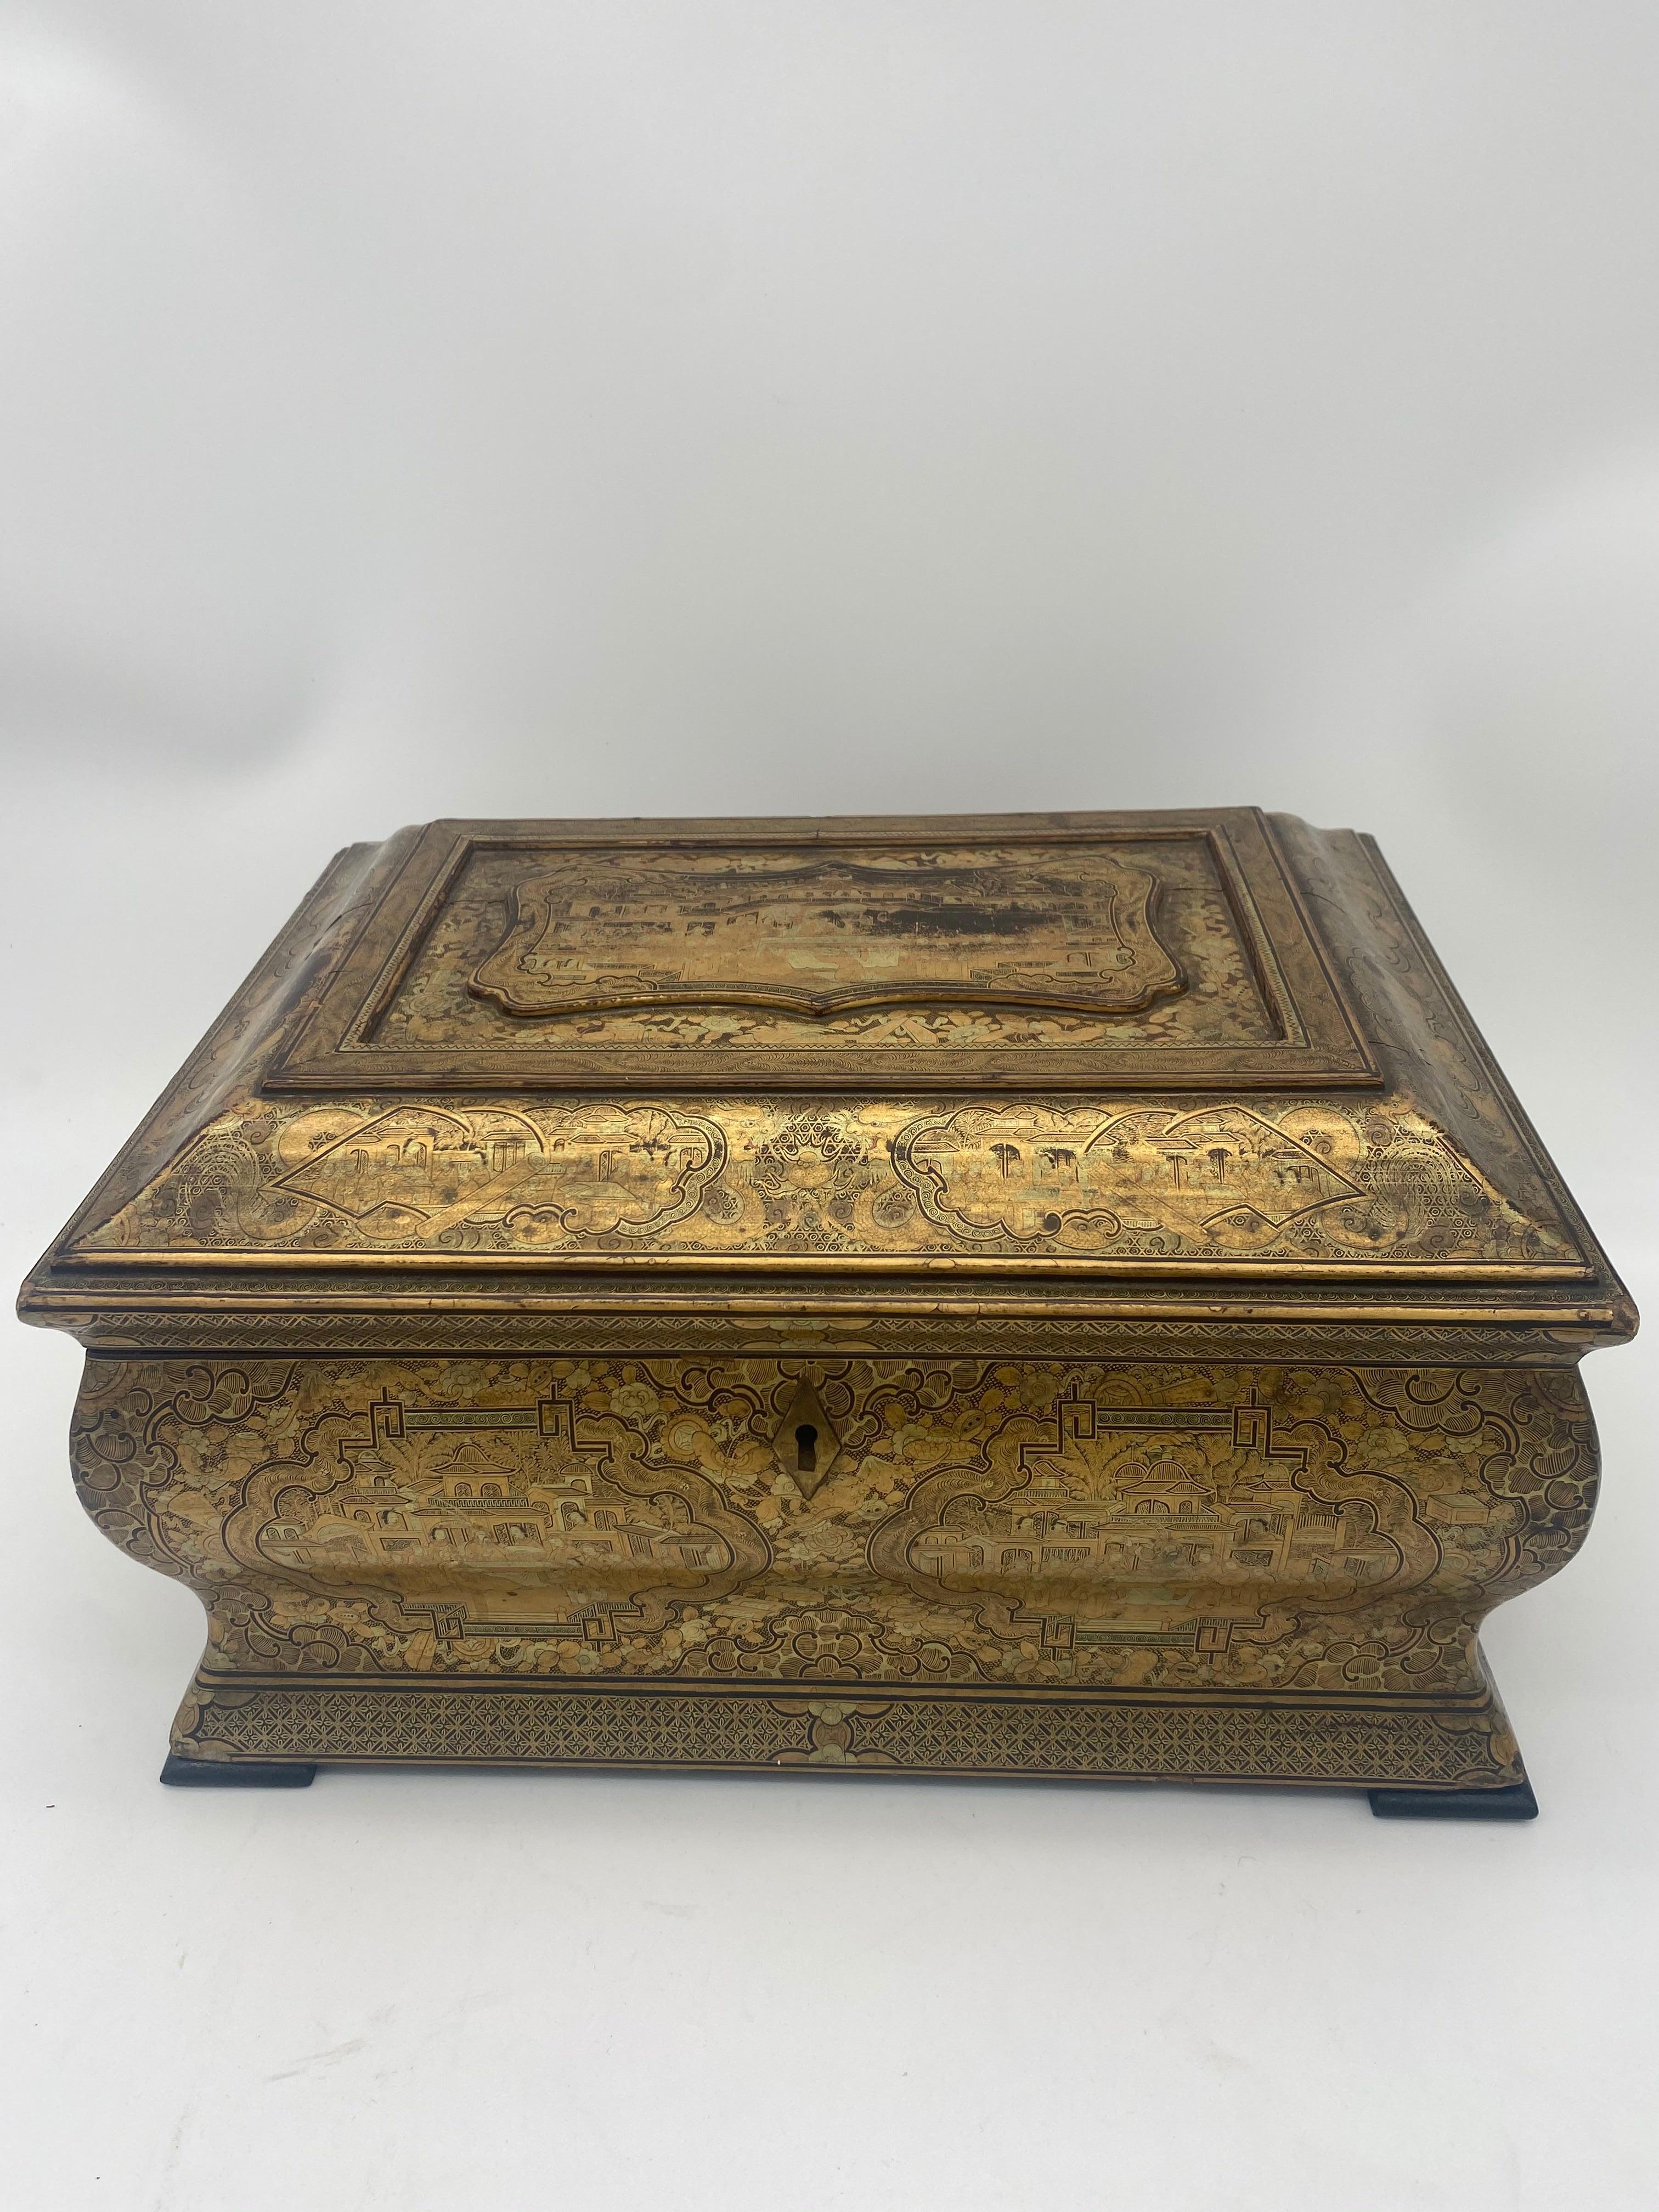 Hand-Carved 19th Century Gilt Lacquer Chinese Tea Caddy